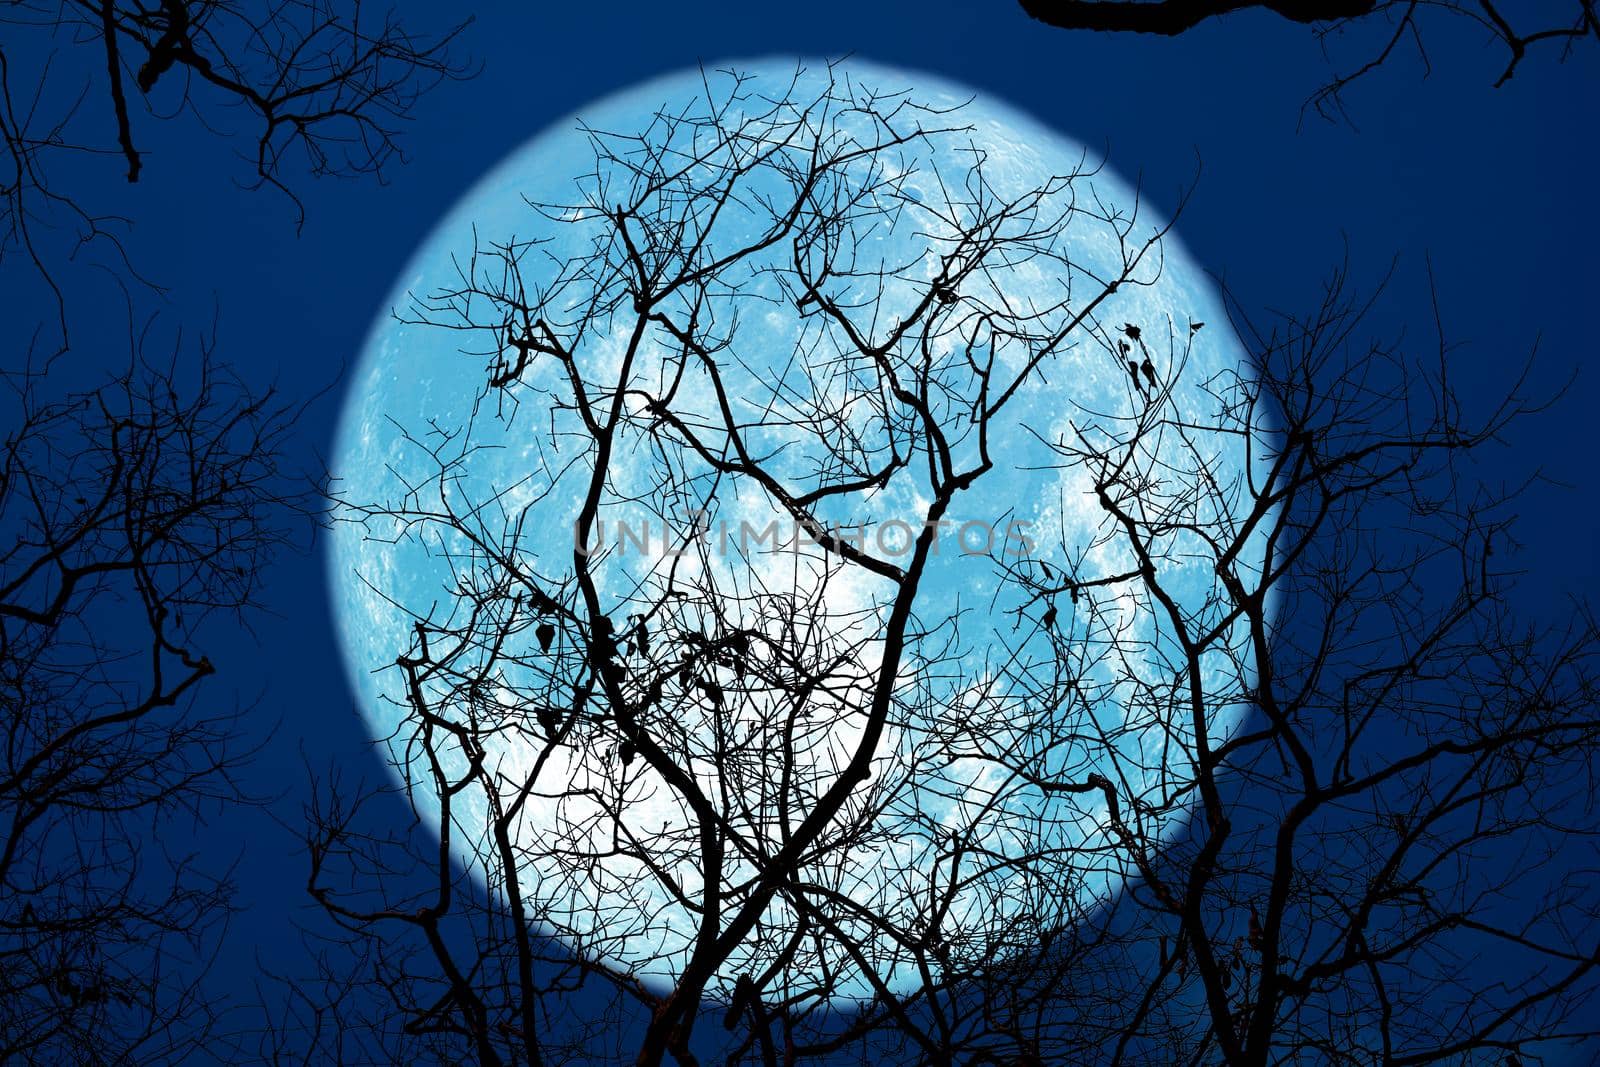 super sturgeon blue moon and silhouette tree in the night sky, Elements of this image furnished by NASA